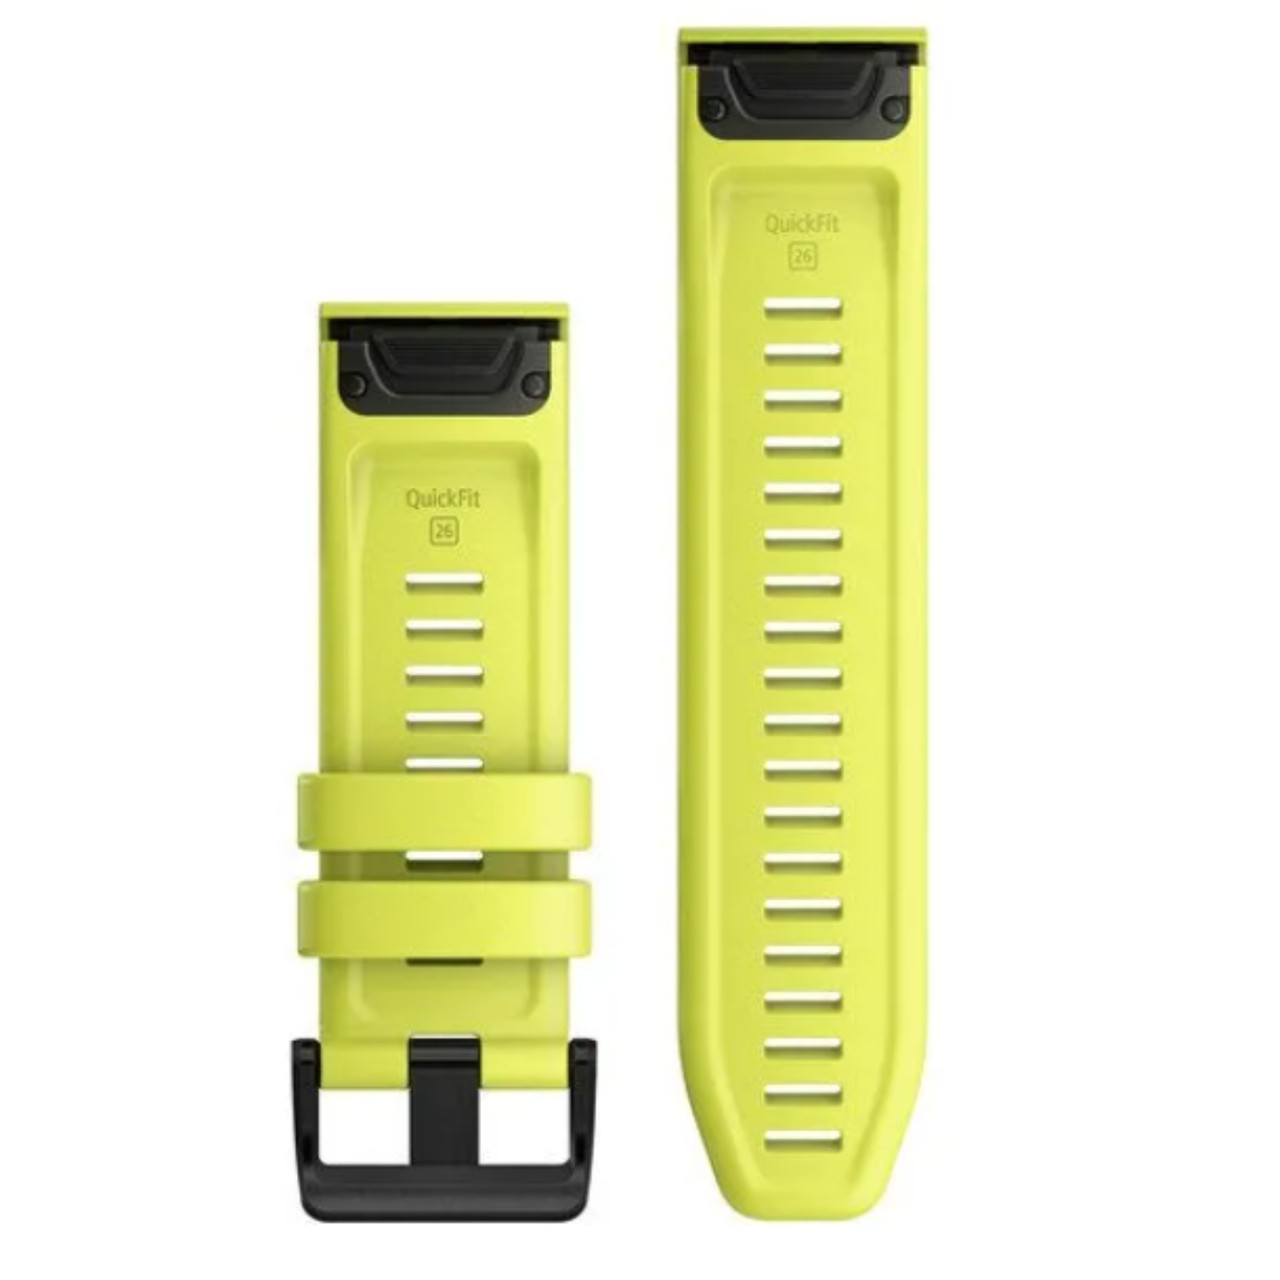 Garmin New OEM QuickFit® 26 Watch Bands Amp Yellow Silicone, 010-12864-04